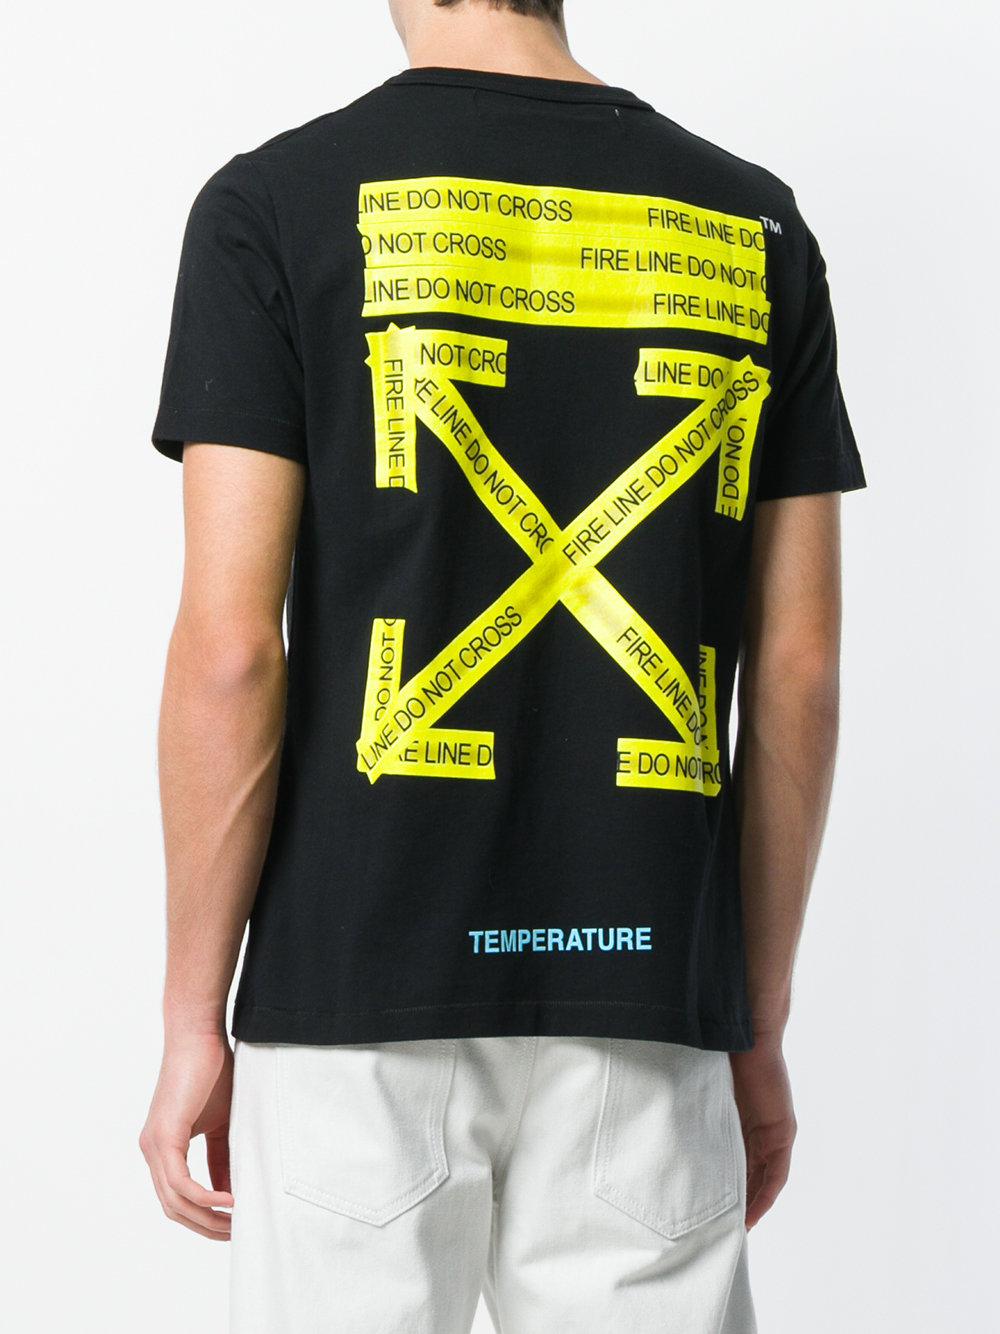 Off-White, Shirts, Offwhite Co Virgil Abloh Accident Tshirt